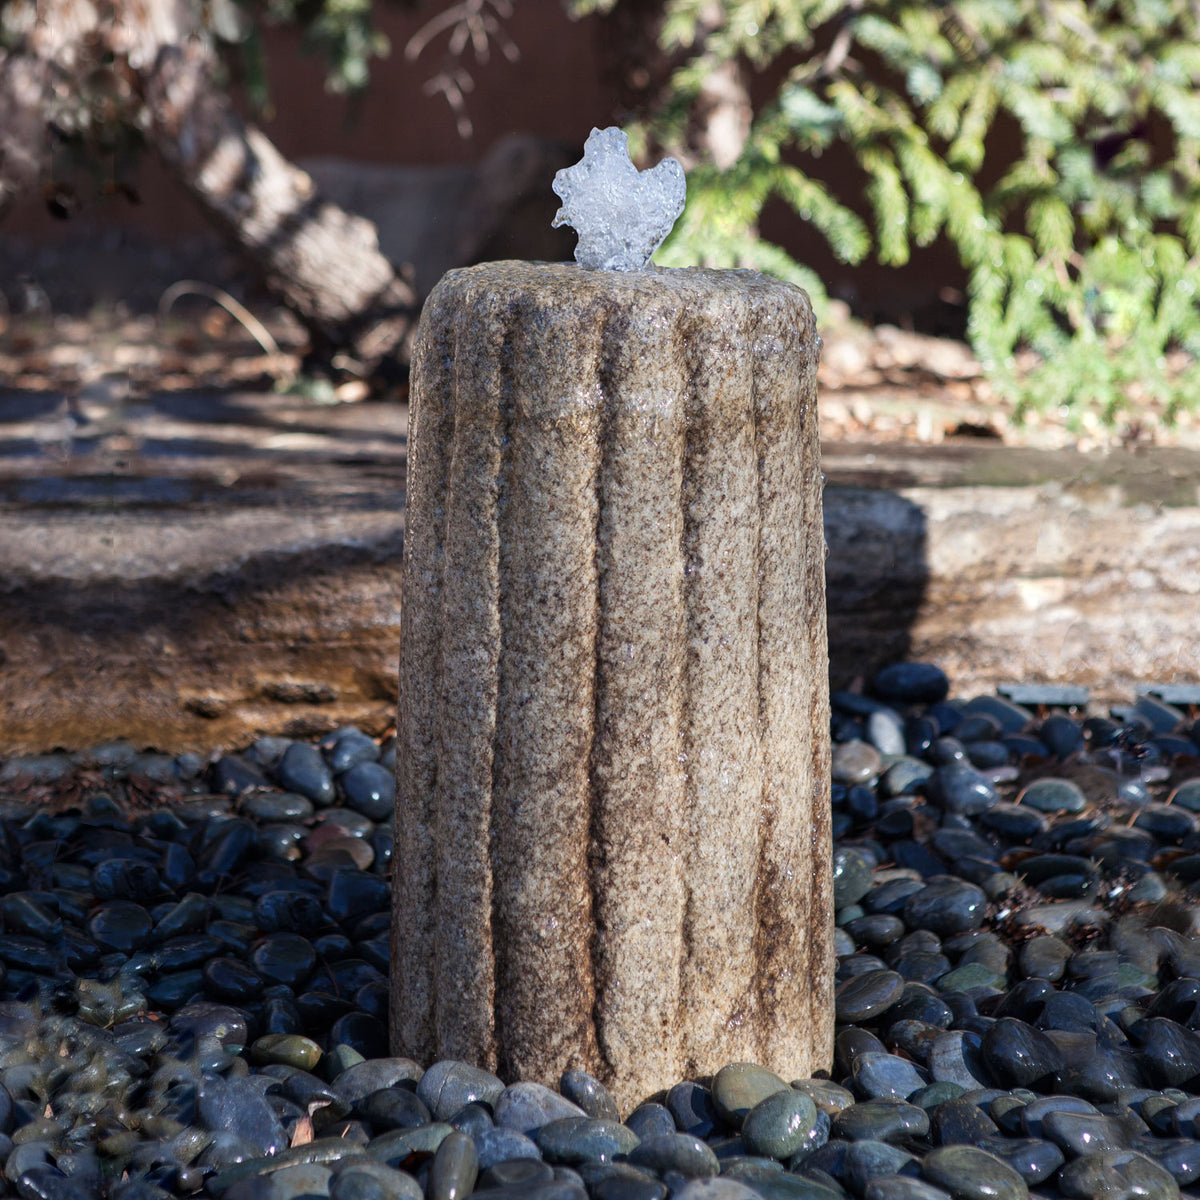 Stone Forest Small Antique Grinding Stone carved from beige granite used as garden fountain image 1 of 2